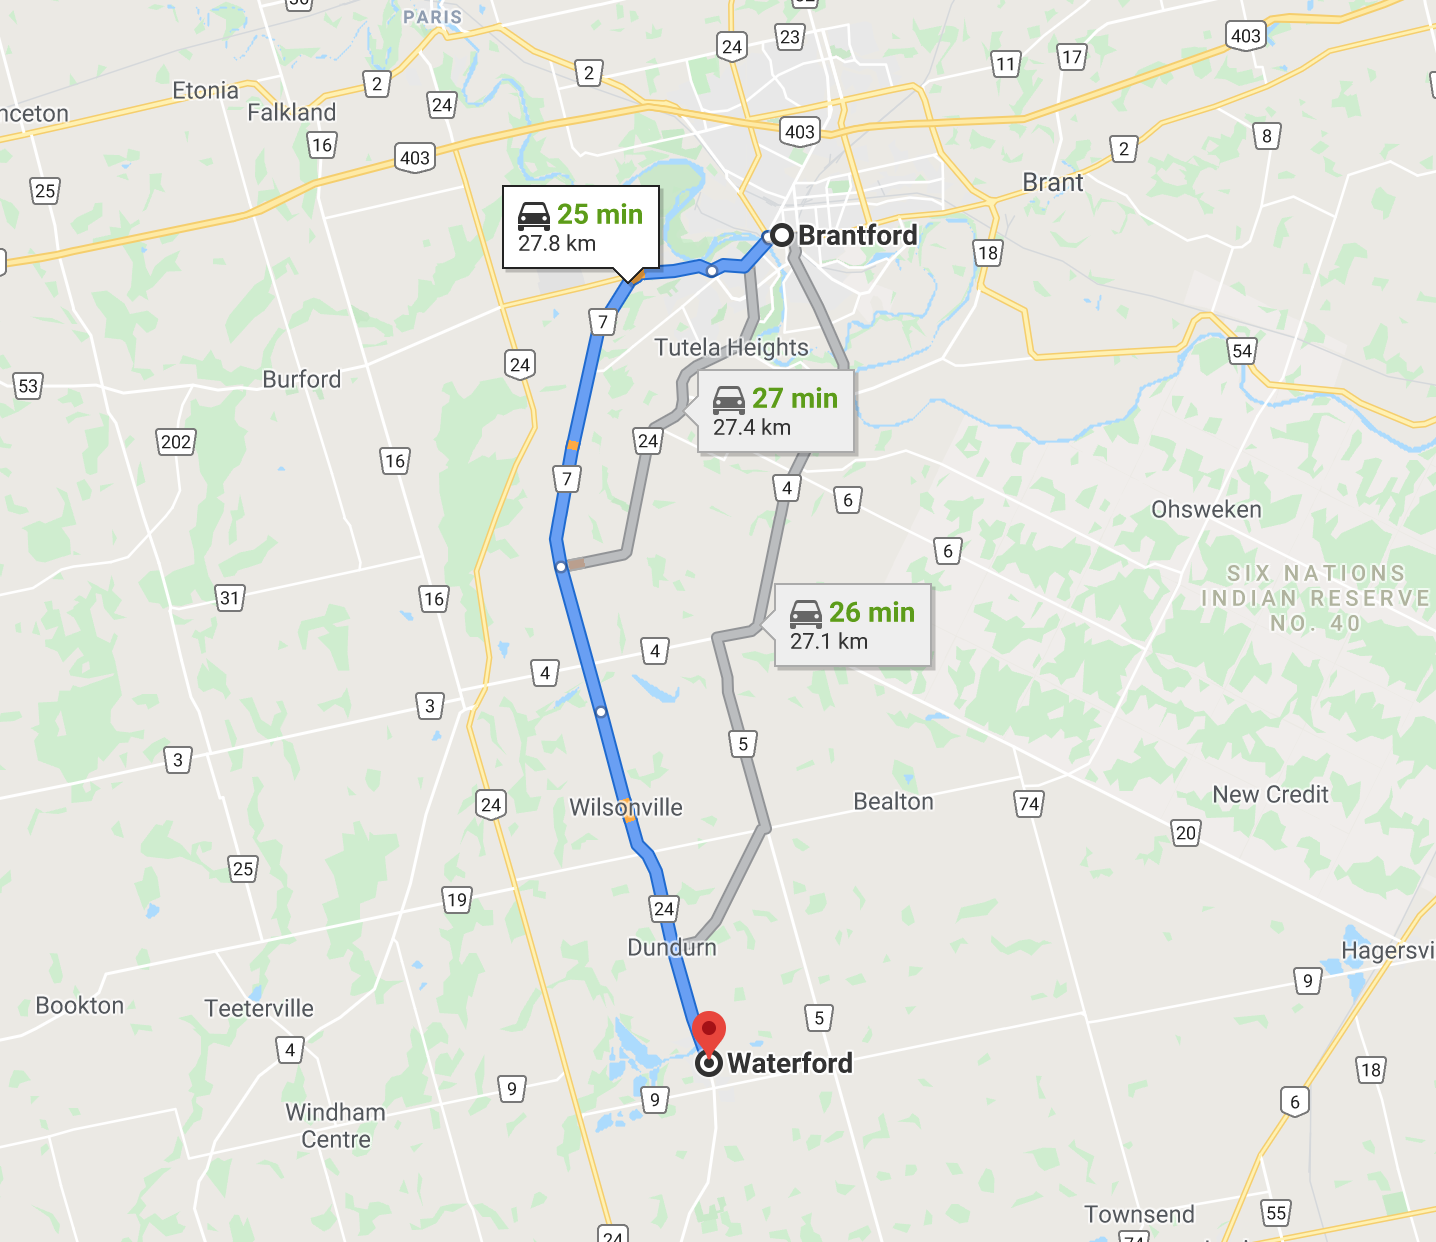 Direction map from Brantford to Villages of Waterford